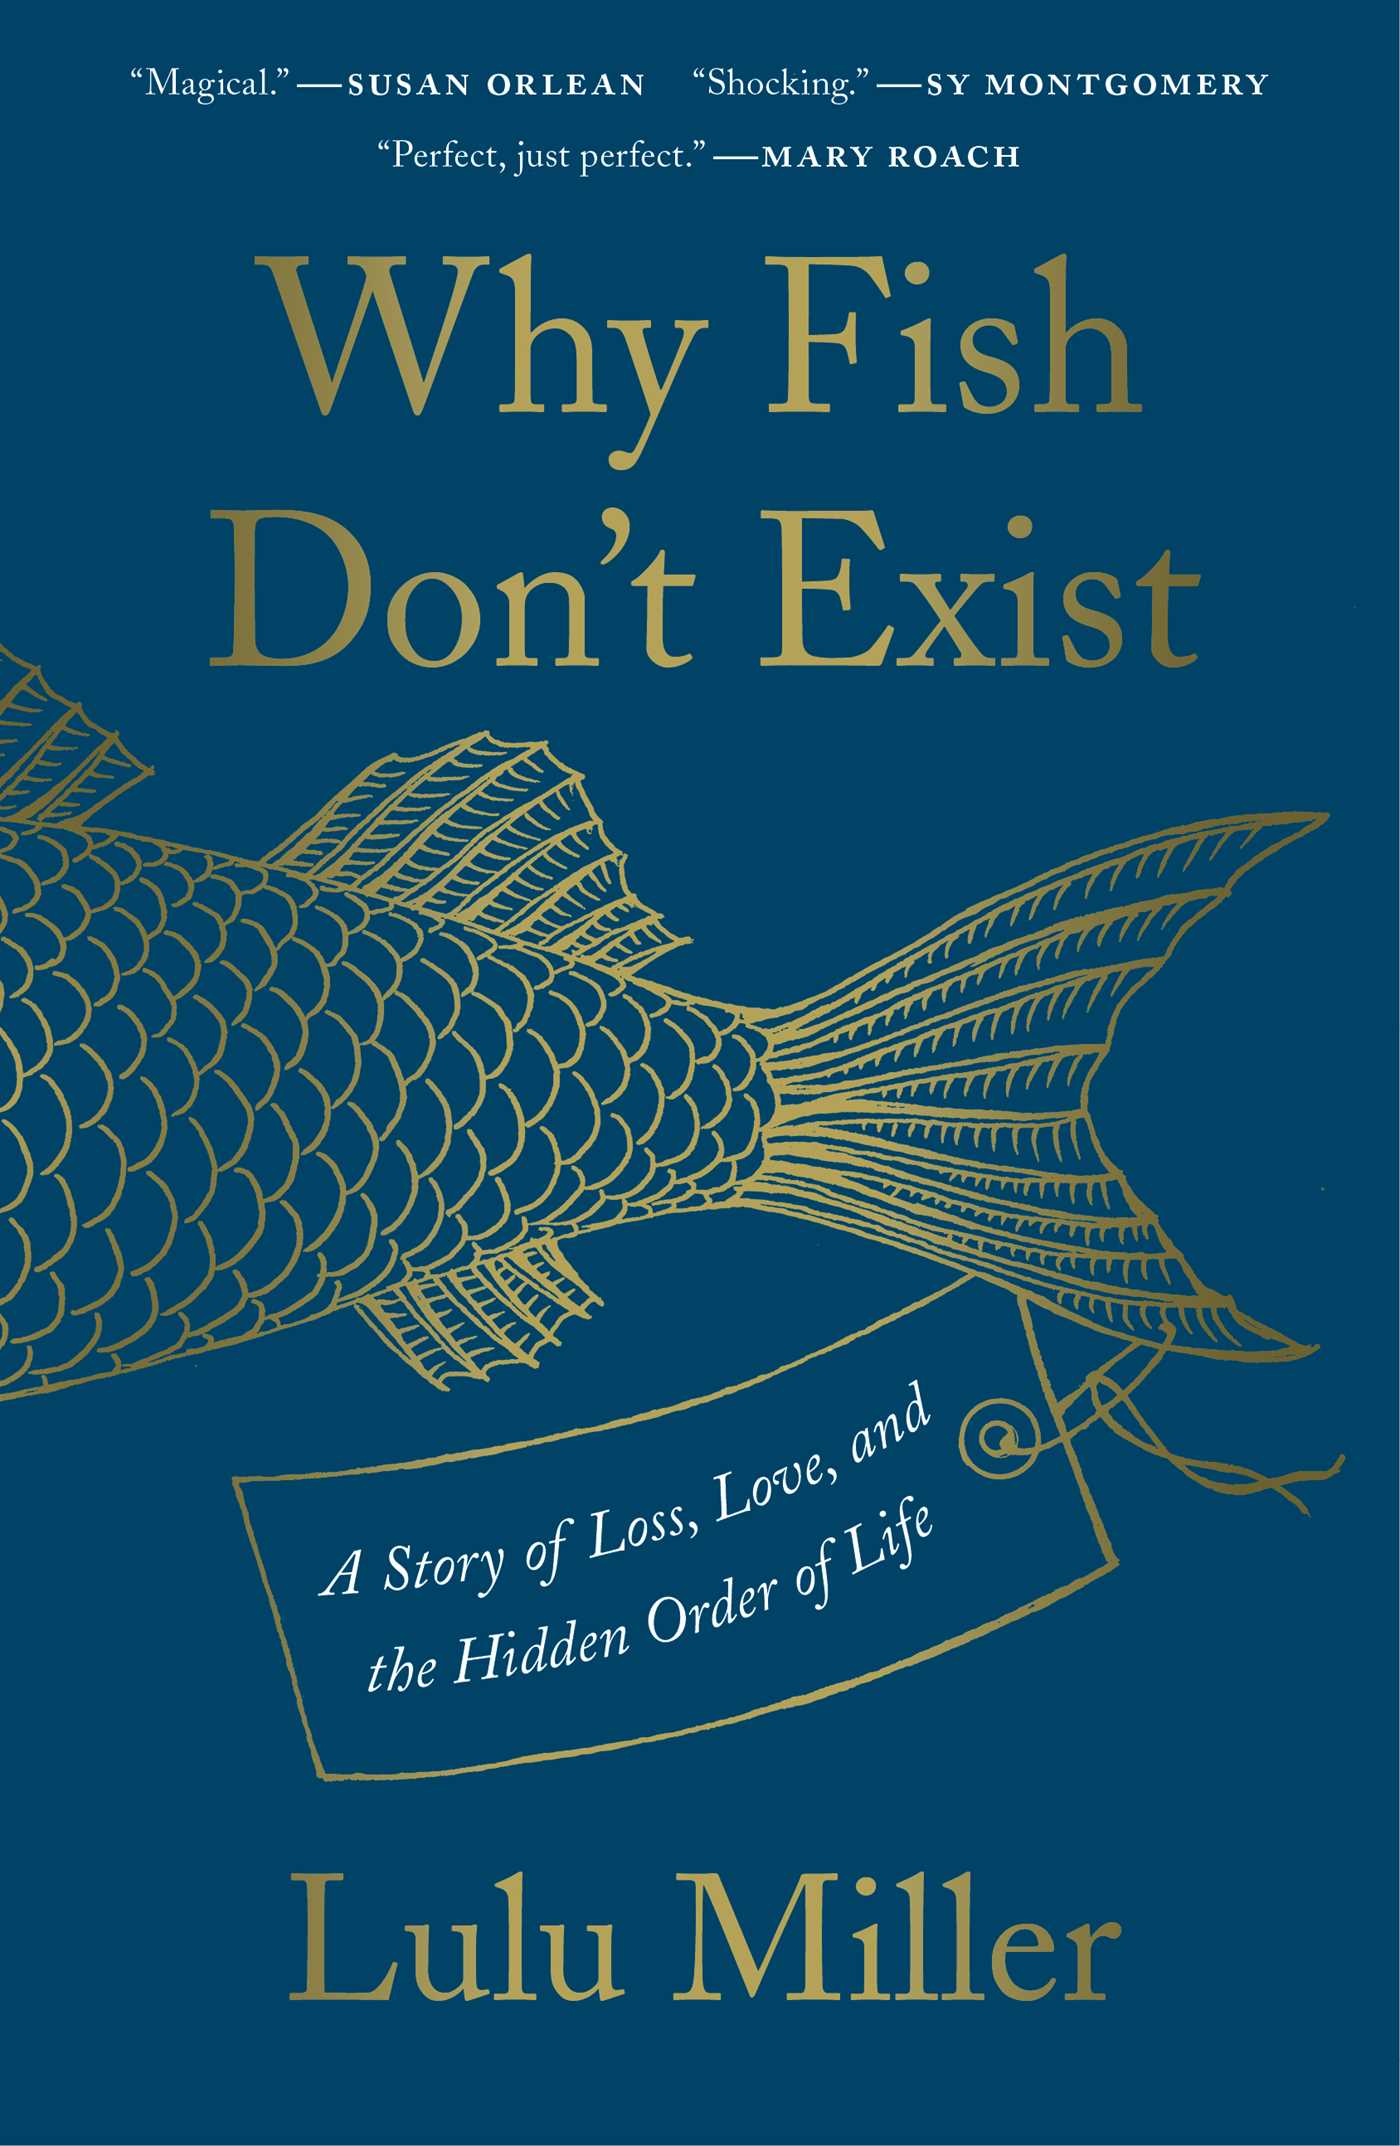 Why Fish Don’t Exist